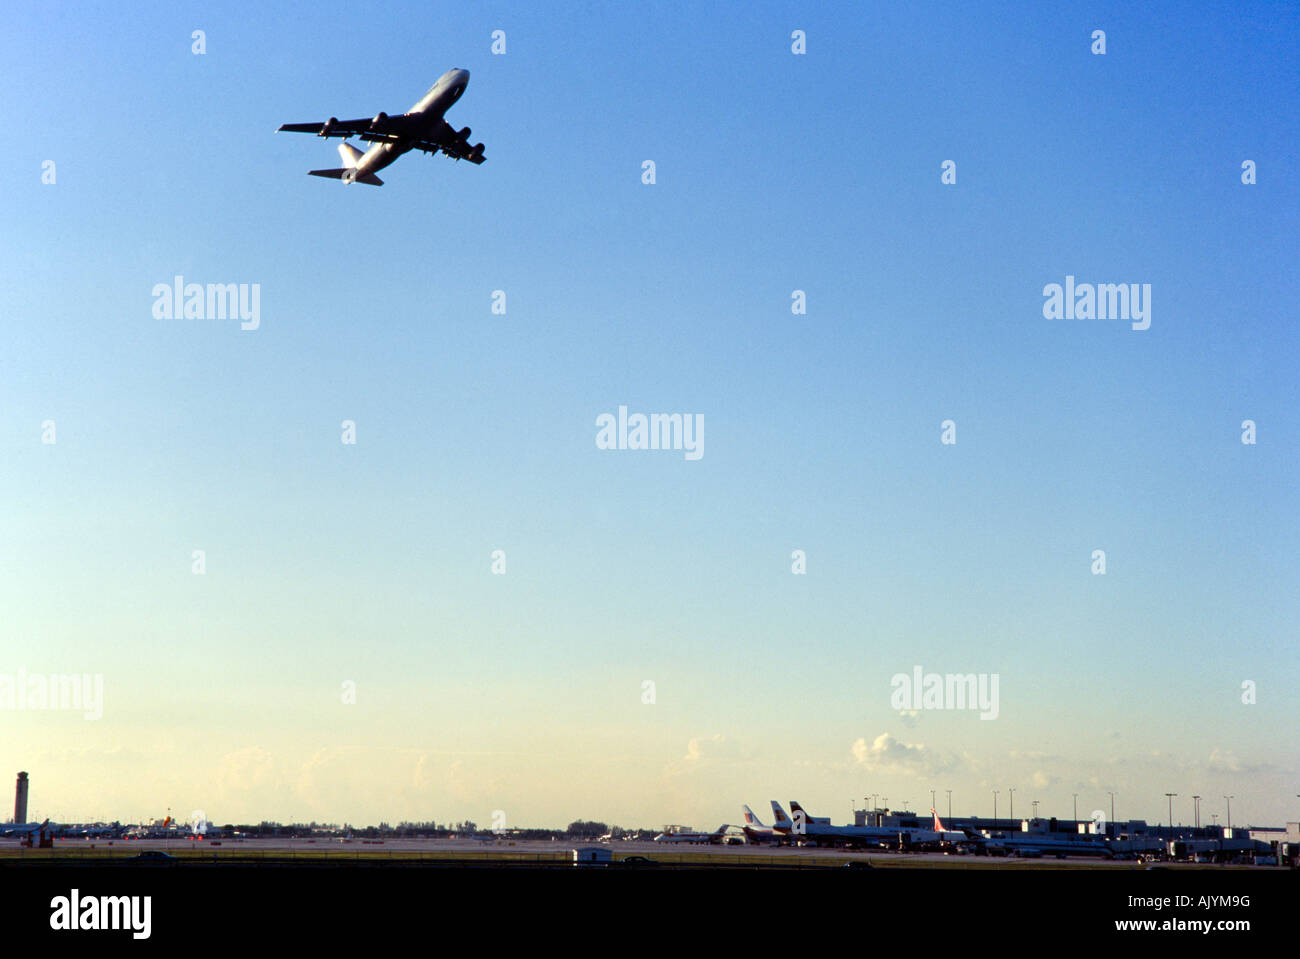 Commercial Airliner takeoff at dusk, over airport, Miami International Airport Stock Photo